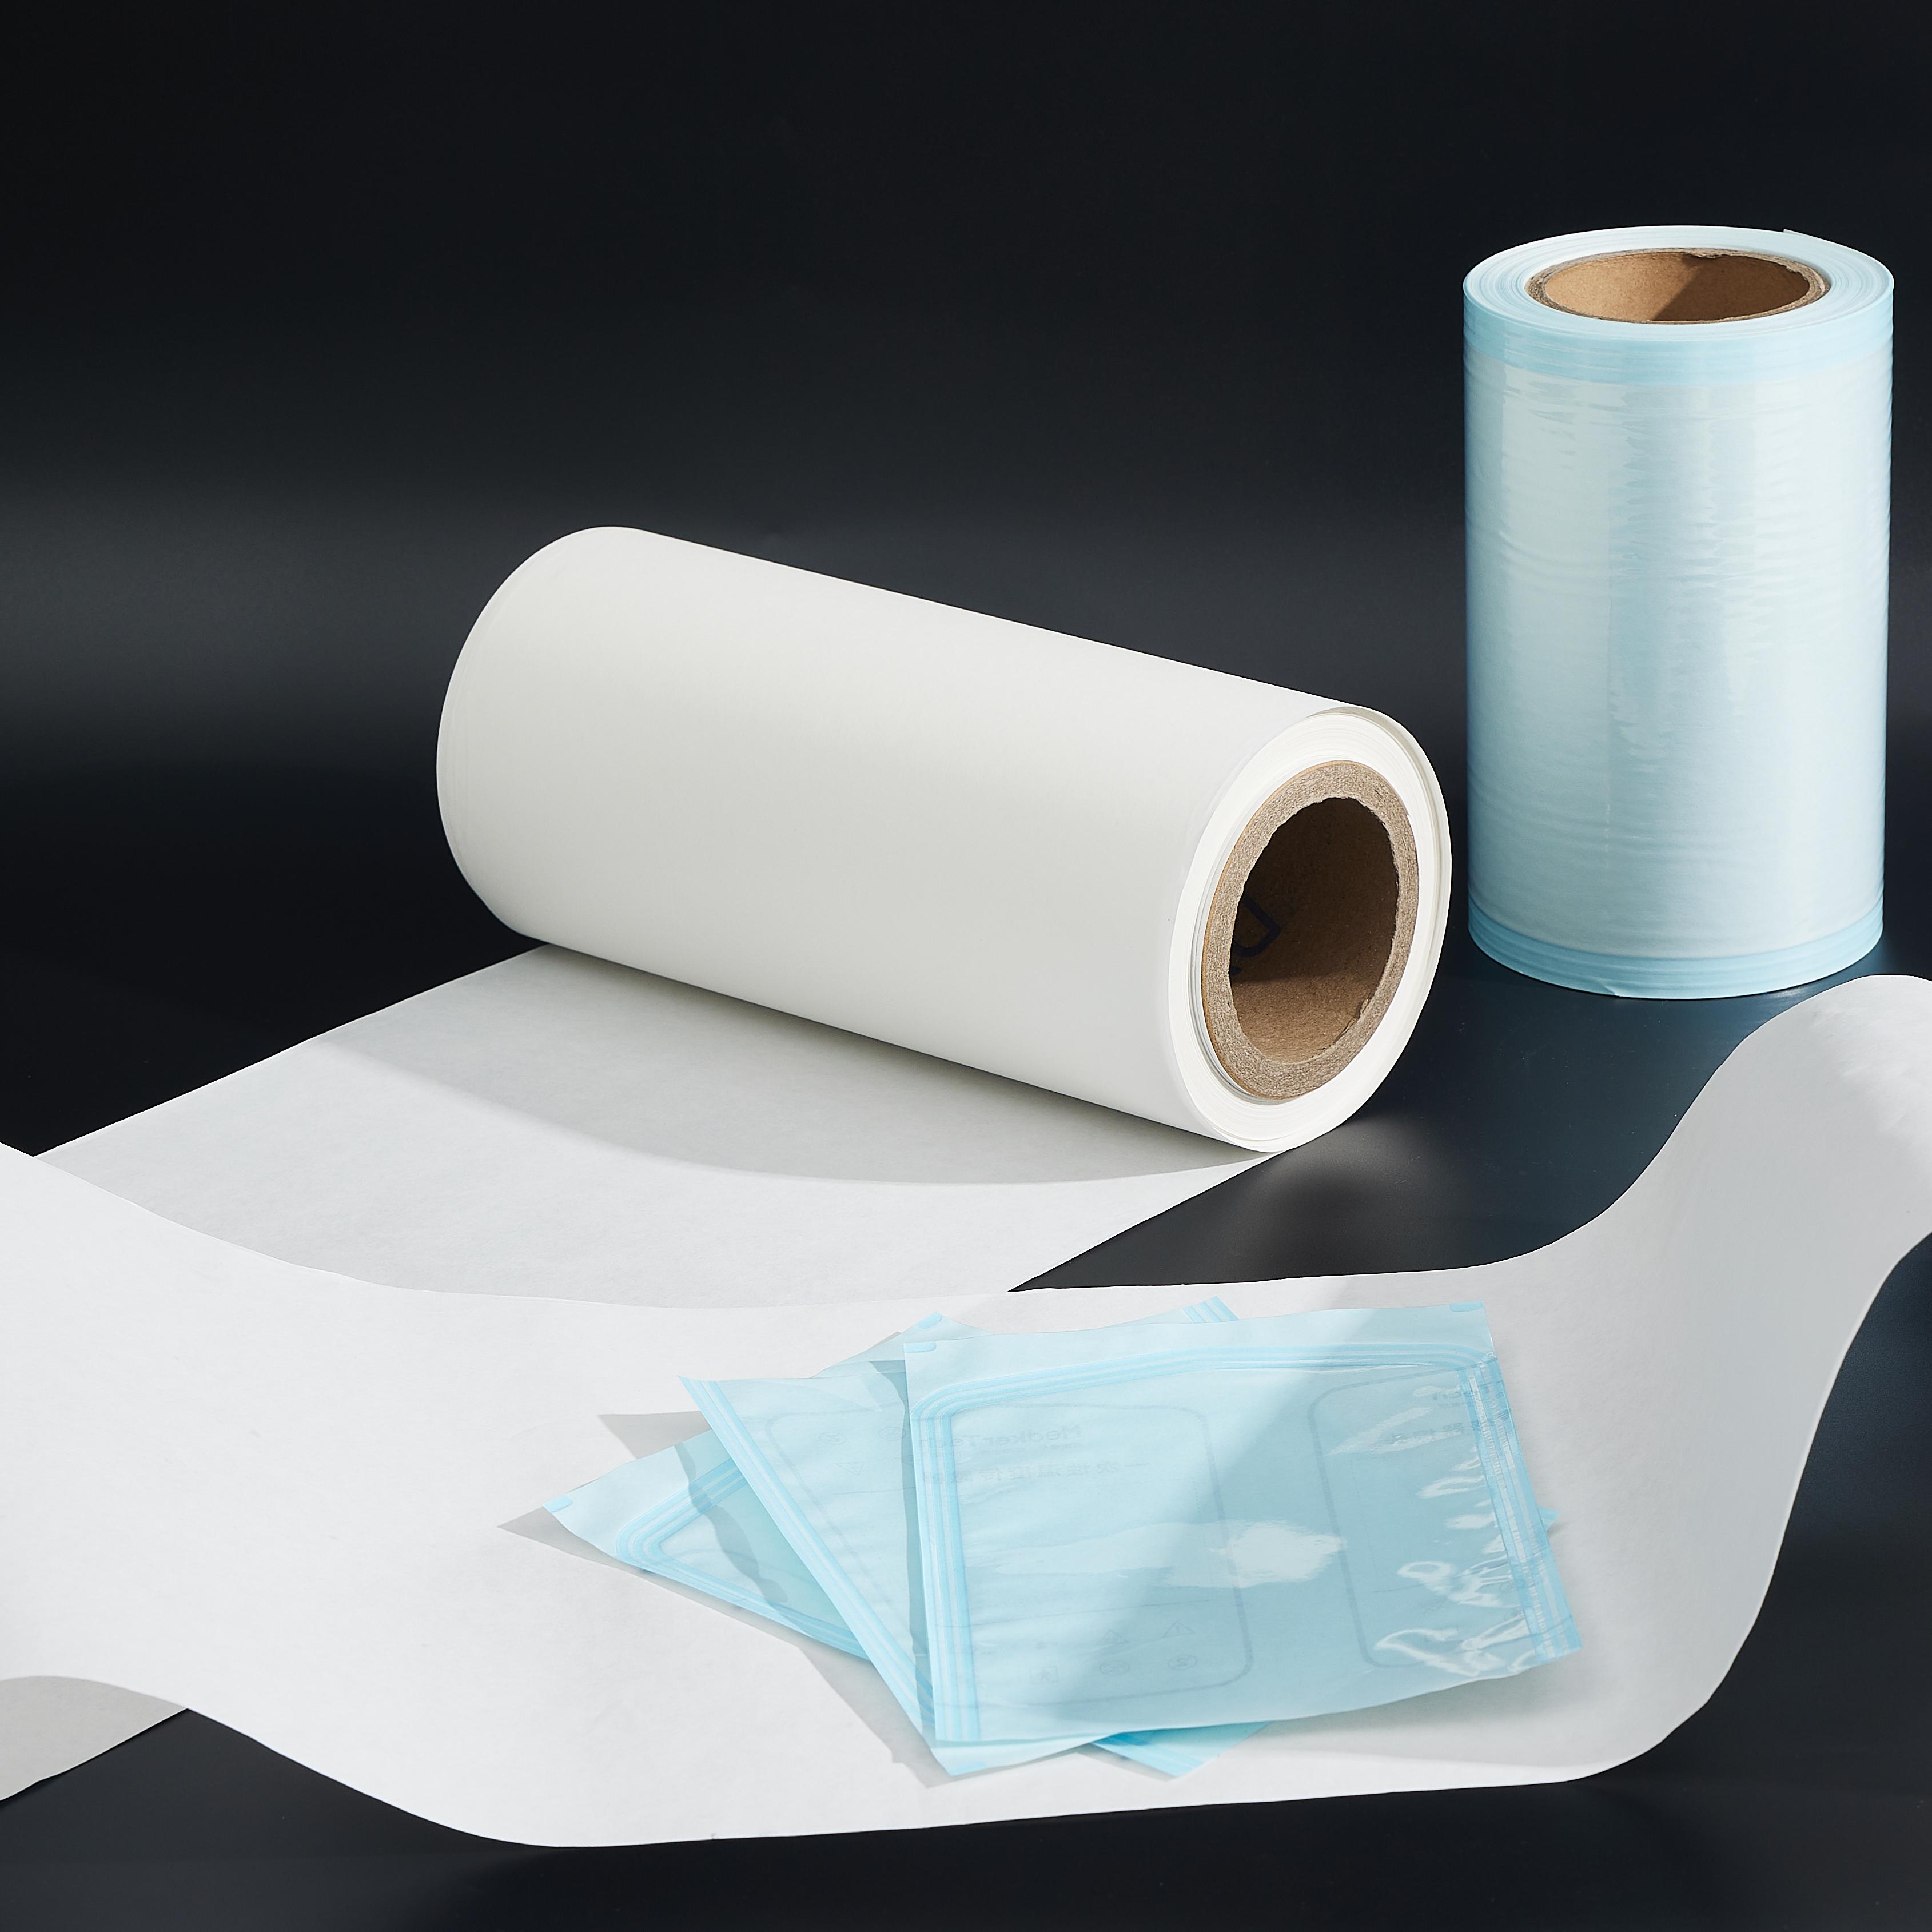 EN Medical Dialysis Paper Sealed with PP Film for Packaging of Surgical Dental Instruments